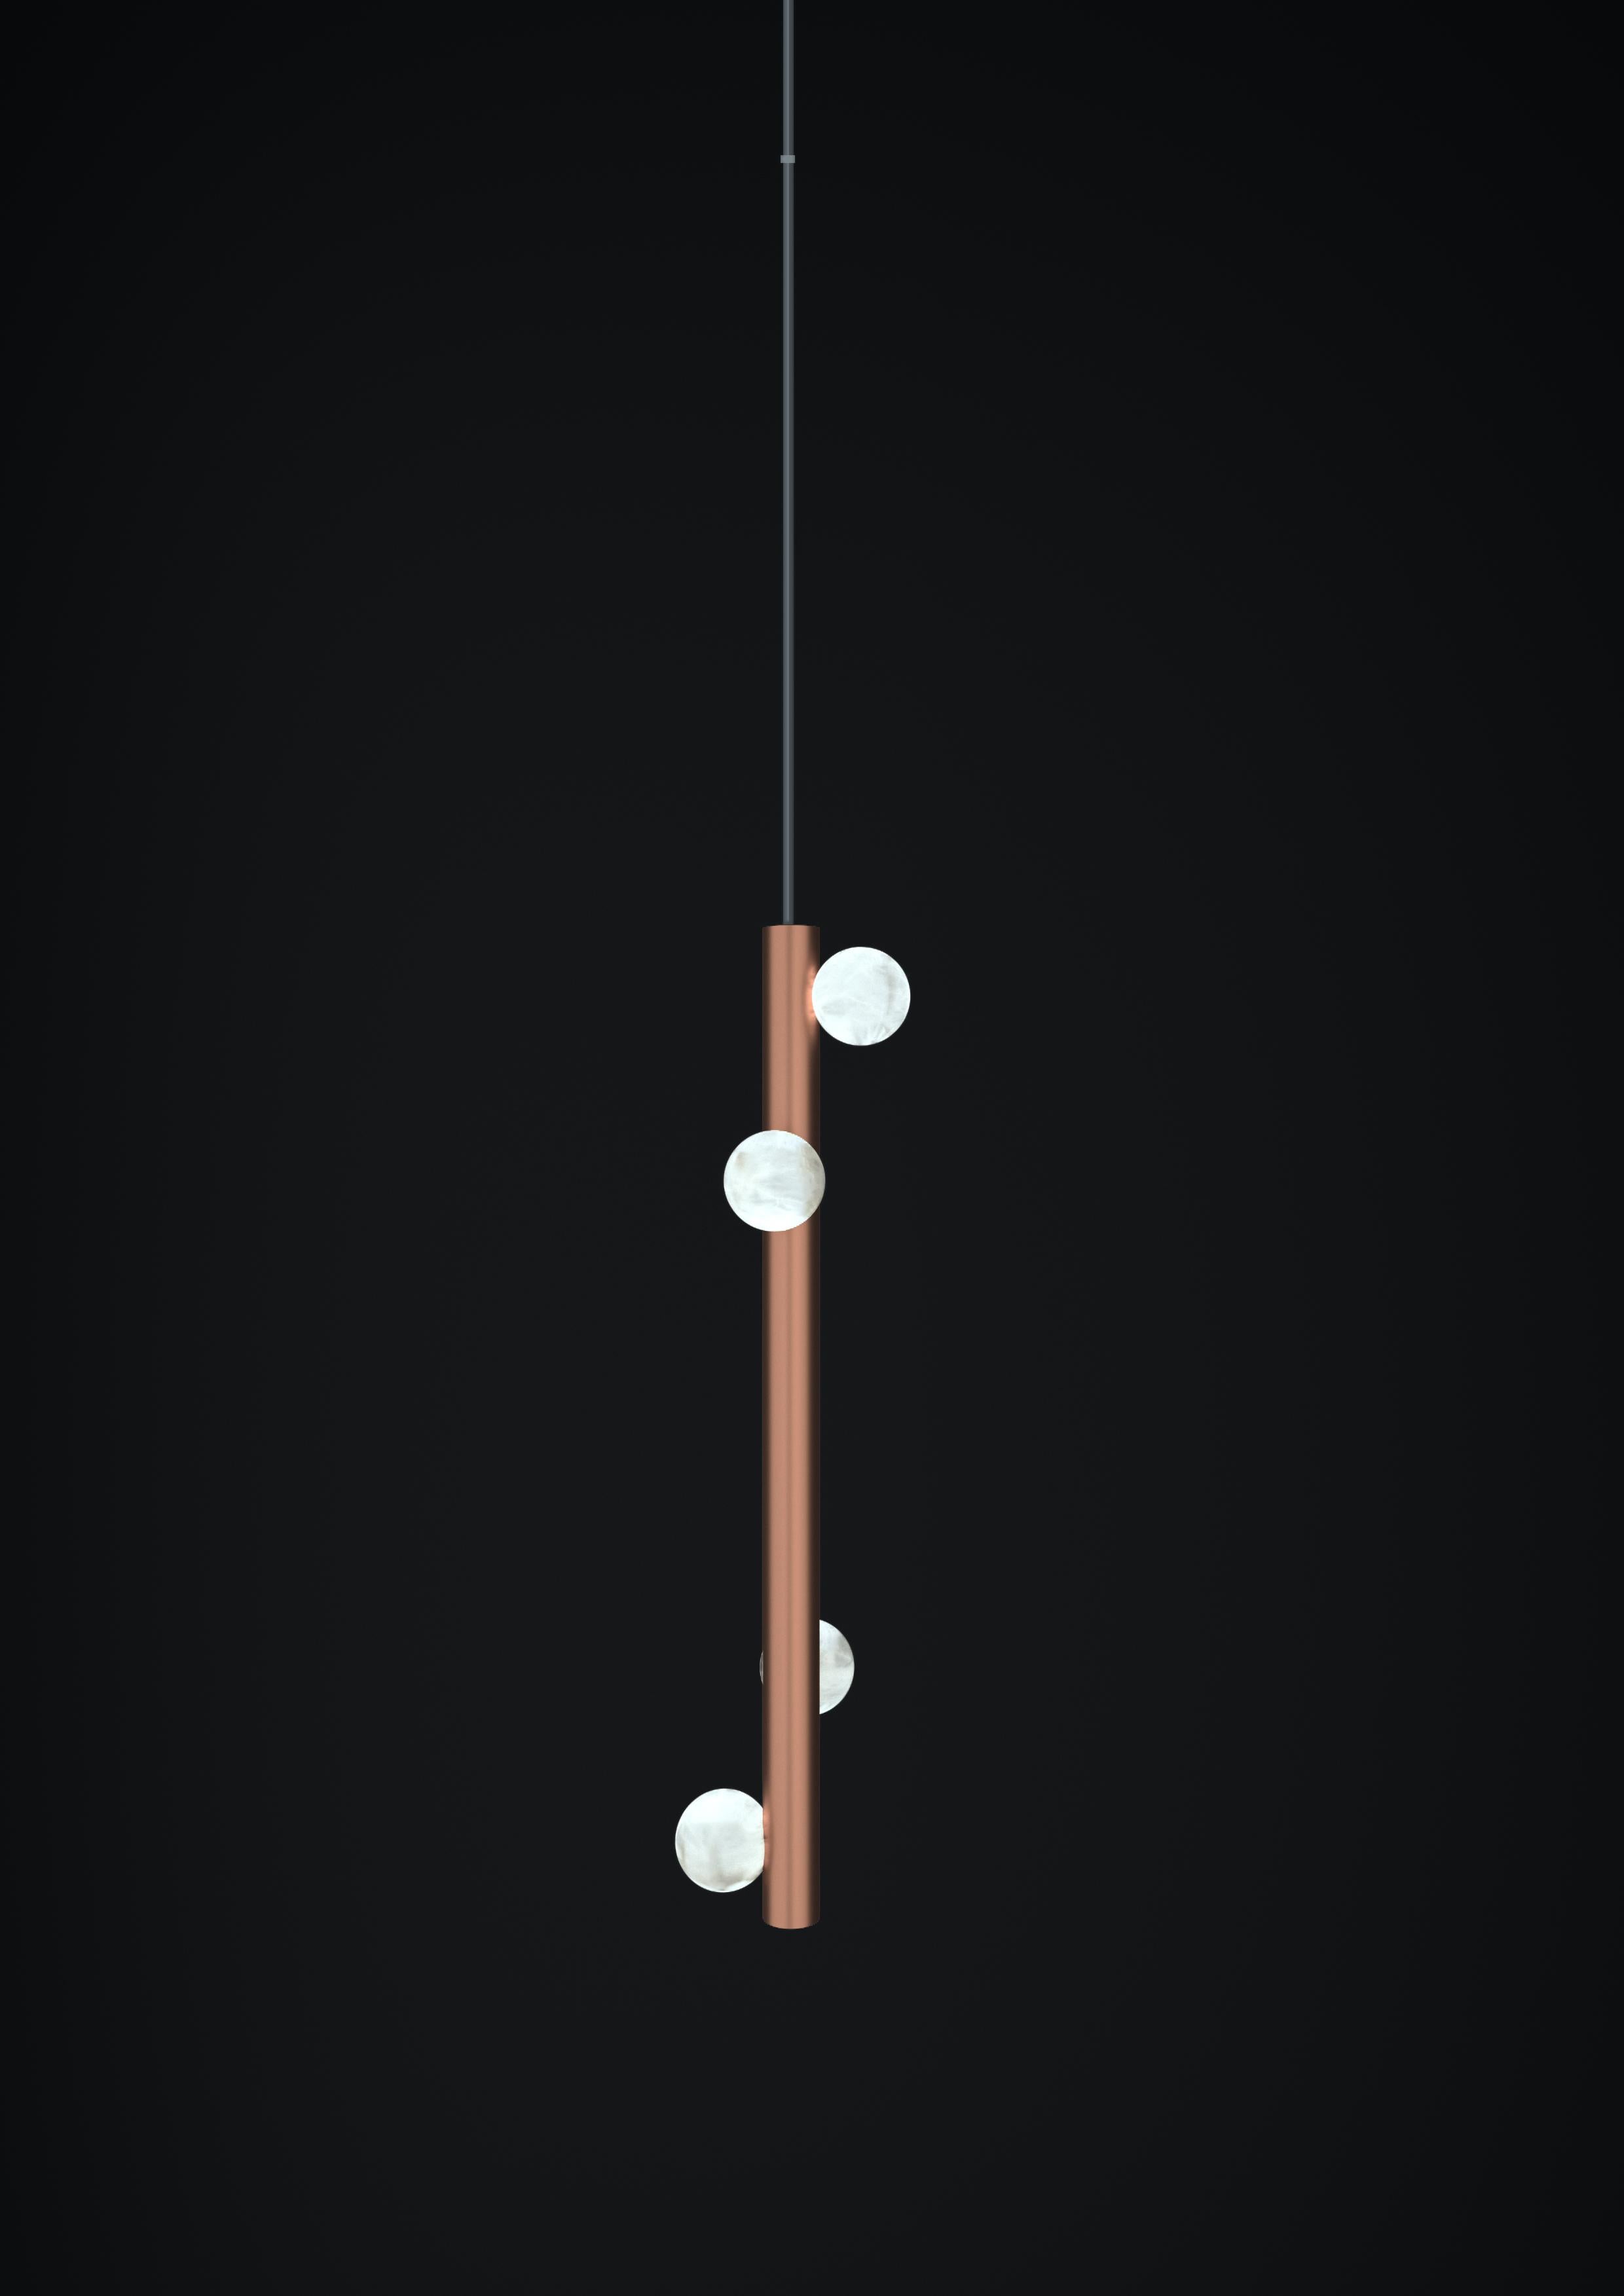 Demetra Copper Pendant Lamp 2 by Alabastro Italiano
Dimensions: D 12 x W 12 x H 60 cm.
Materials: White alabaster and copper.

Available in different finishes: Shiny Silver, Bronze, Brushed Brass, Ruggine of Florence, Brushed Burnished, Shiny Gold,